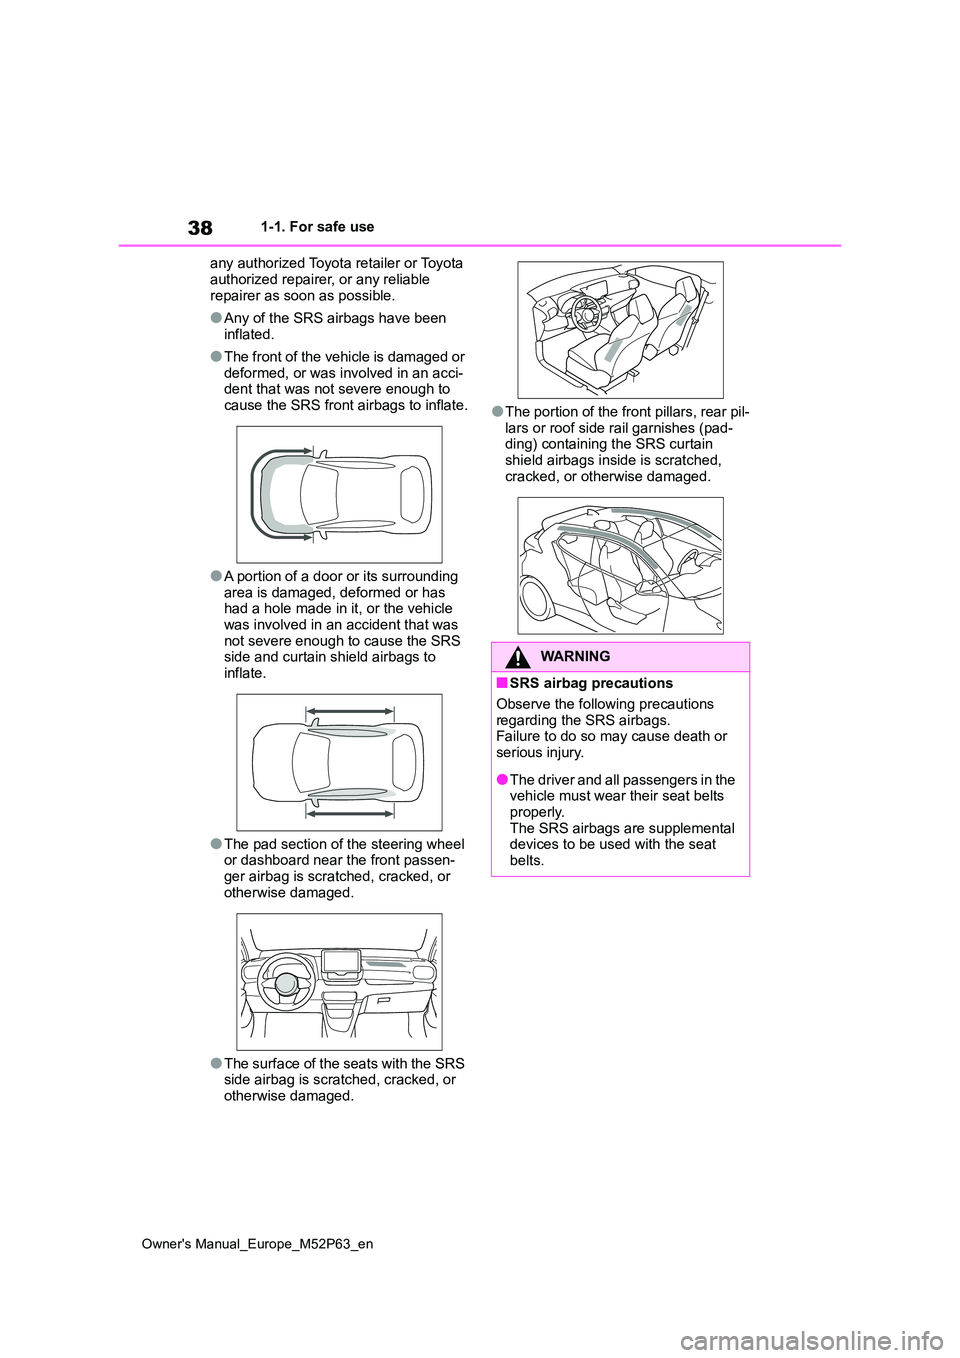 TOYOTA GR YARIS 2023  Owners Manual 38
Owner's Manual_Europe_M52P63_en
1-1. For safe use 
any authorized Toyota retailer or Toyota  
authorized repairer, or any reliable  repairer as soon as possible.
●Any of the SRS airbags have 